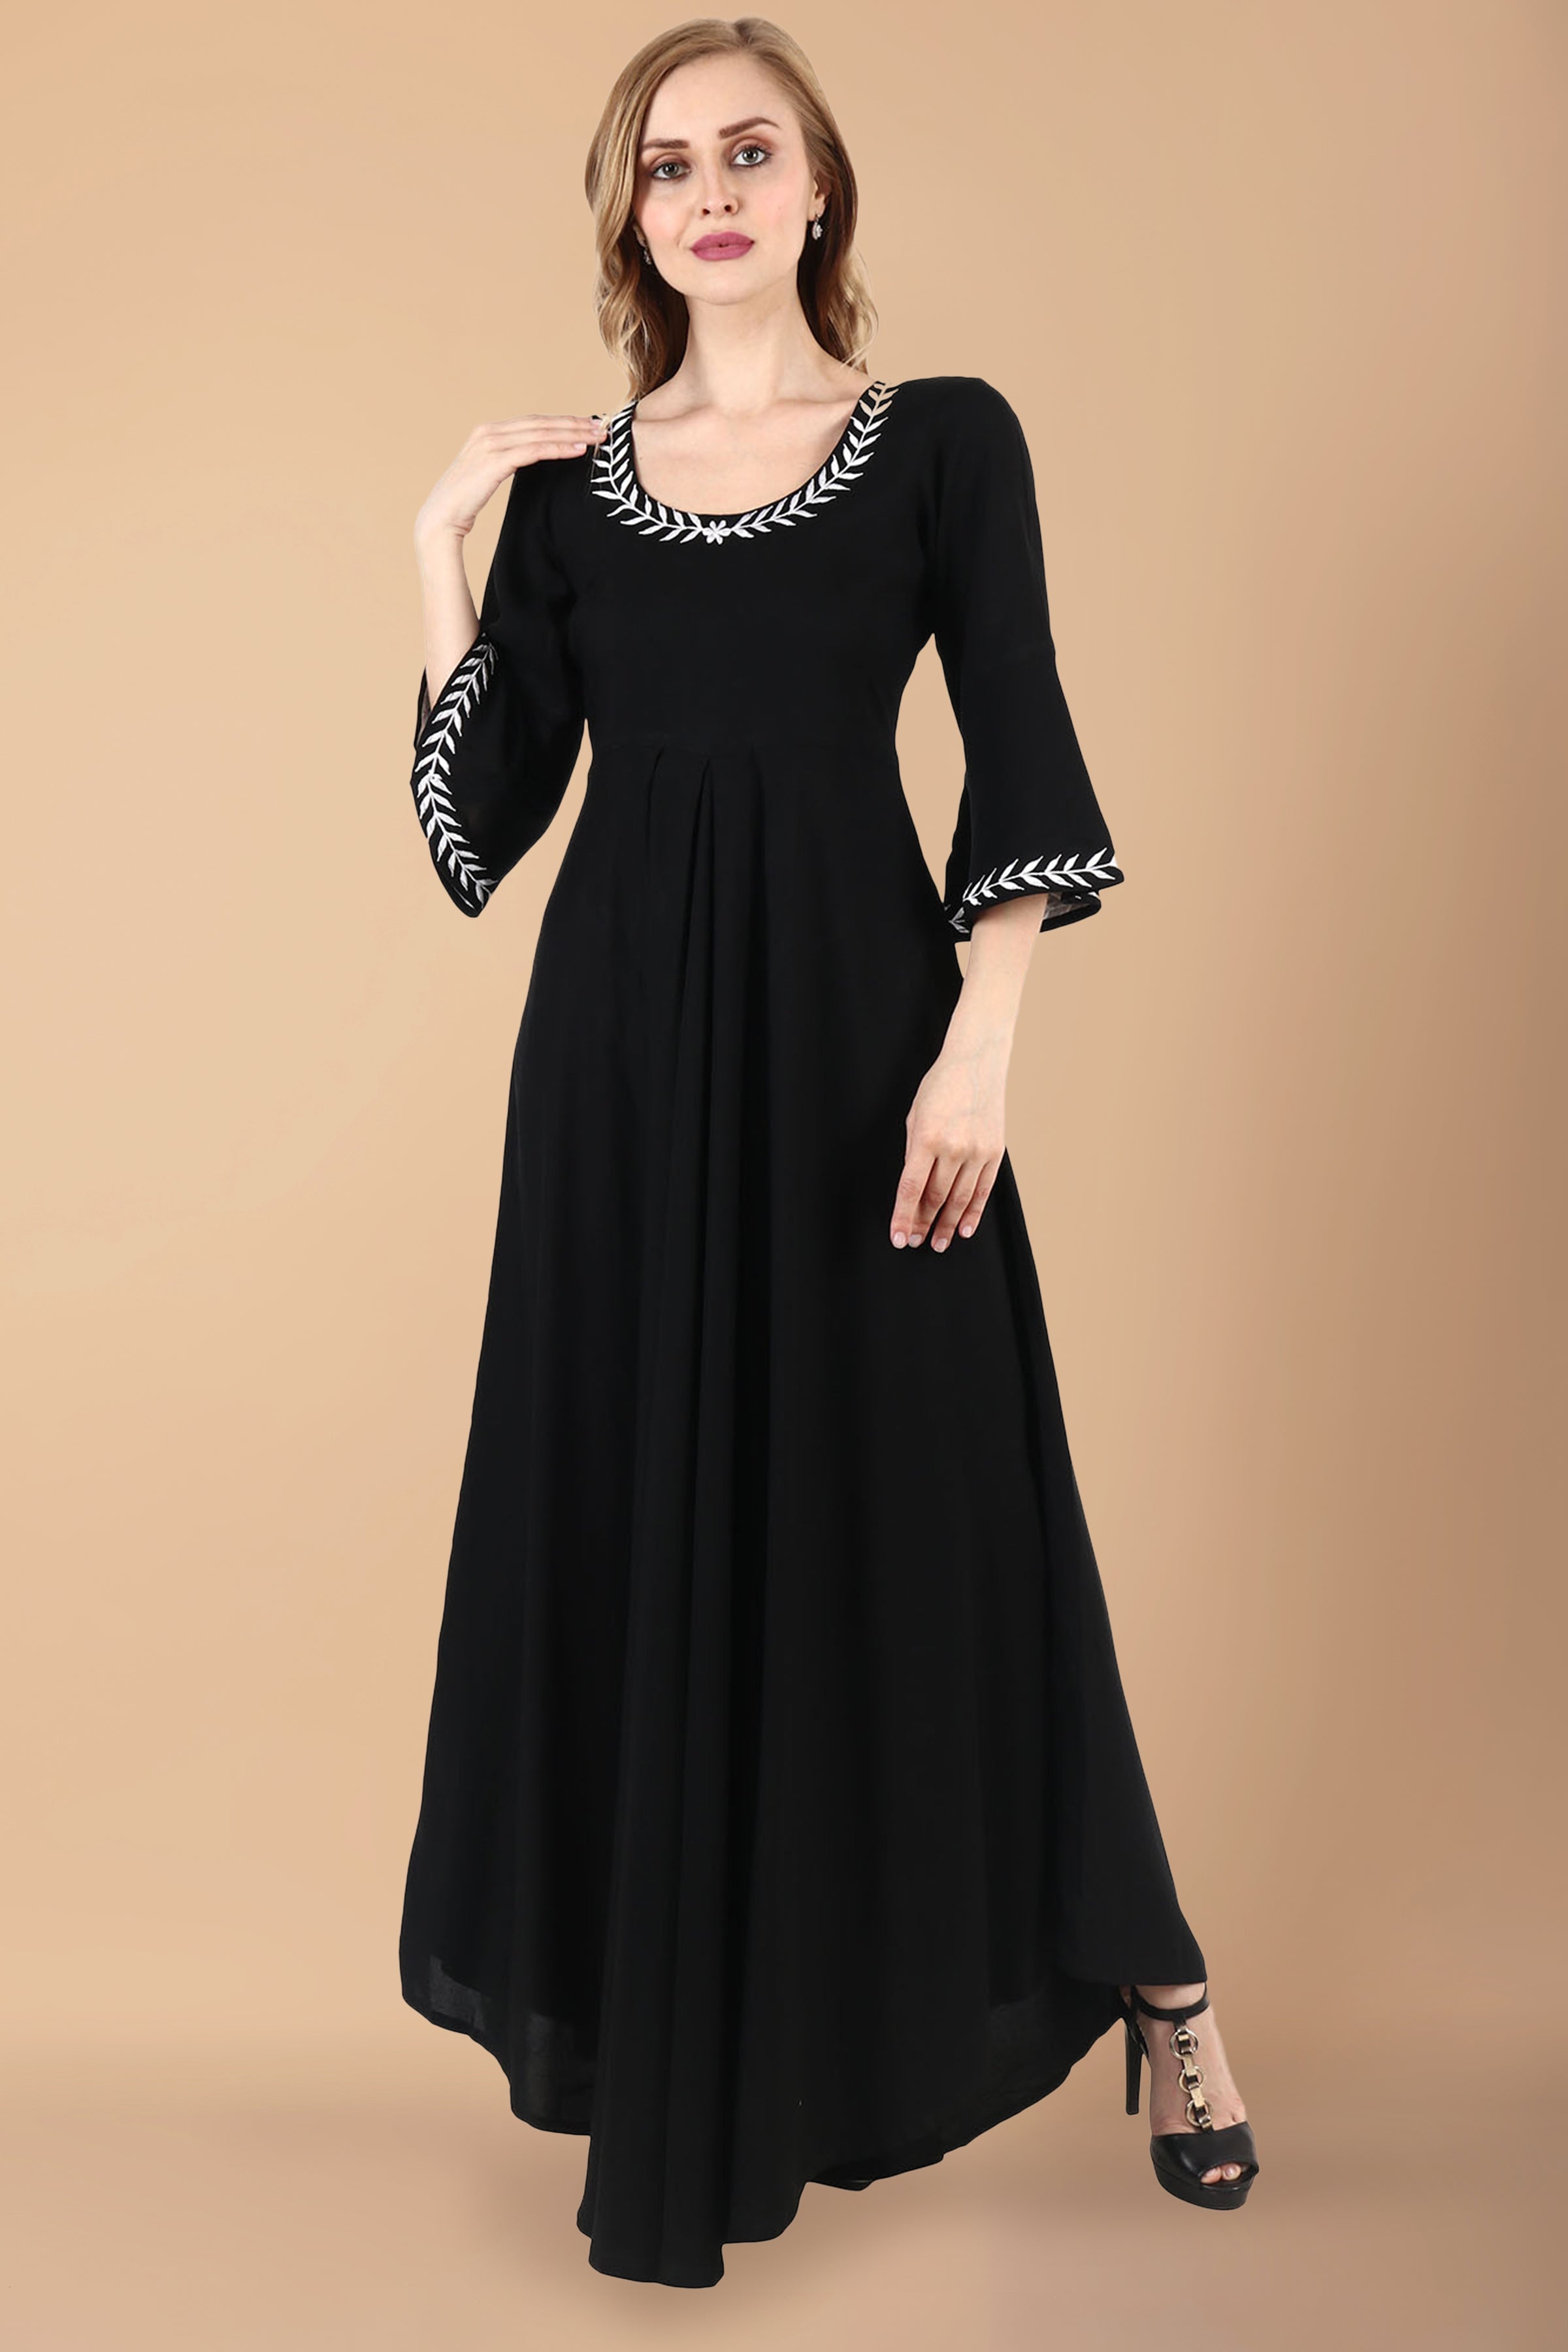 Black Color Party Wear Gown With Girls Designer Party Wear Gown